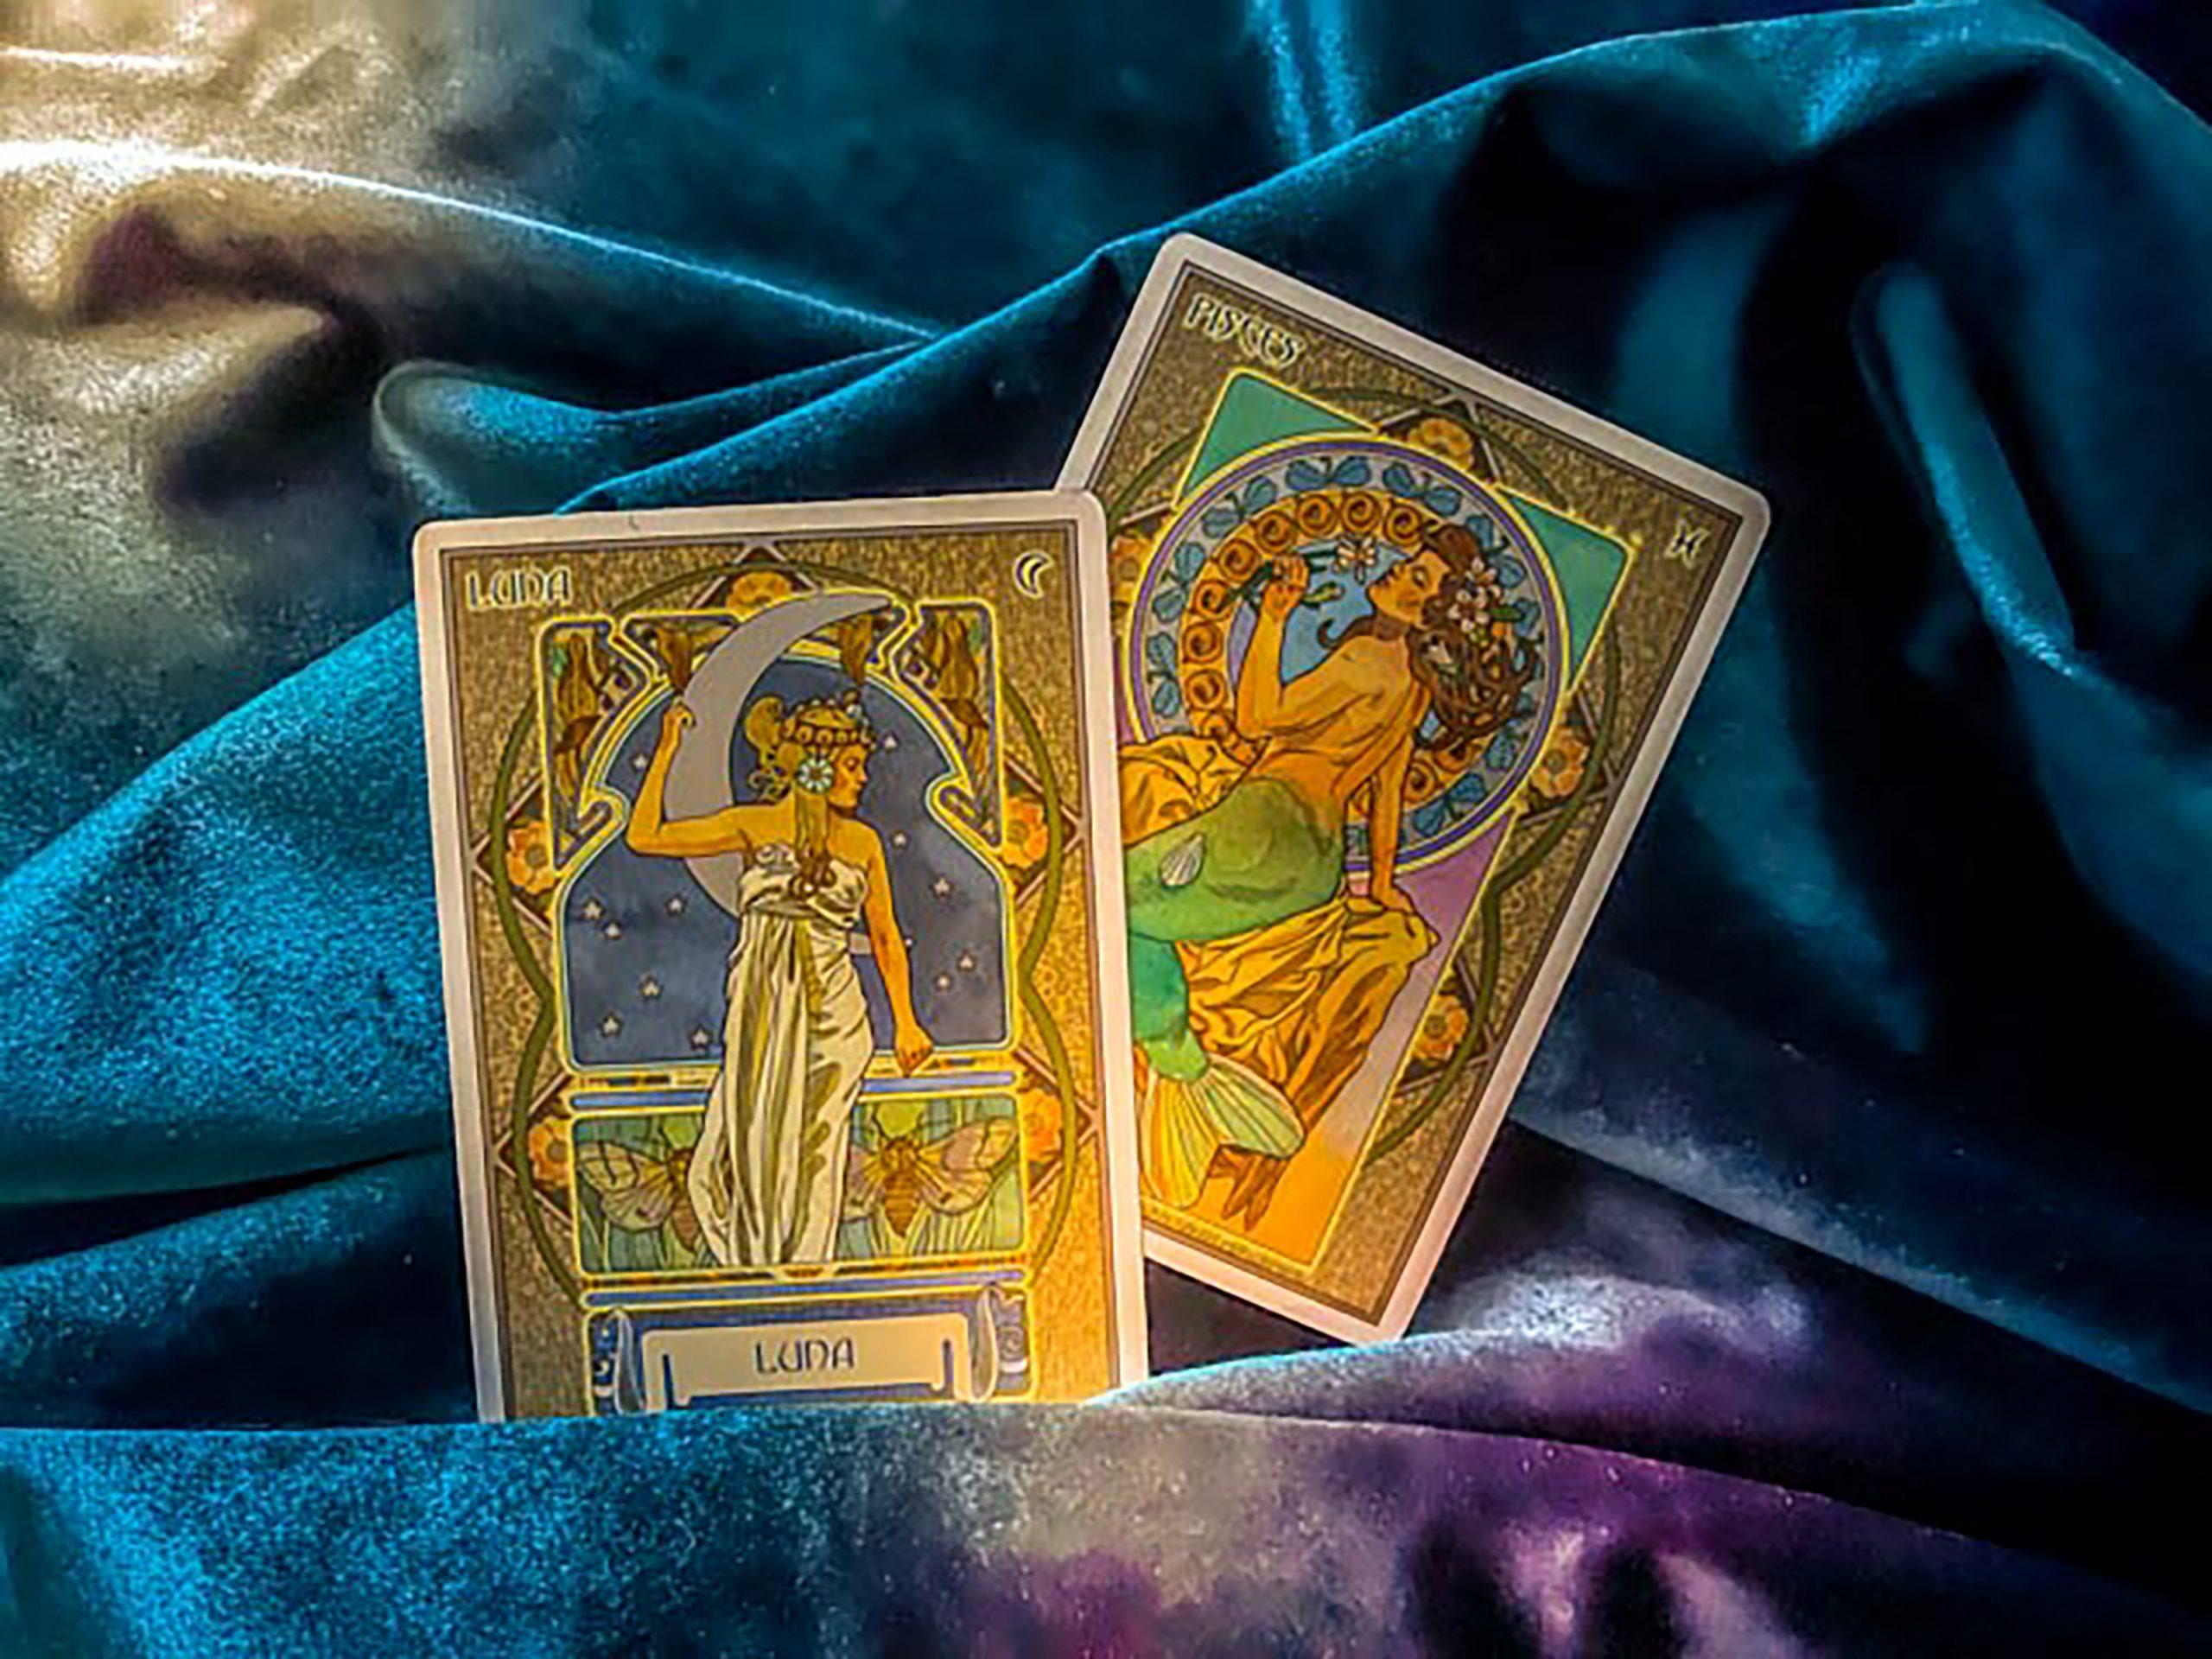 Pisces Power Card: The Moon Your intuition will lead you through your fears and uncertainty. Beware of illusion. Tap into the power of the lunar cycles. From the Astrological Oracle deck.